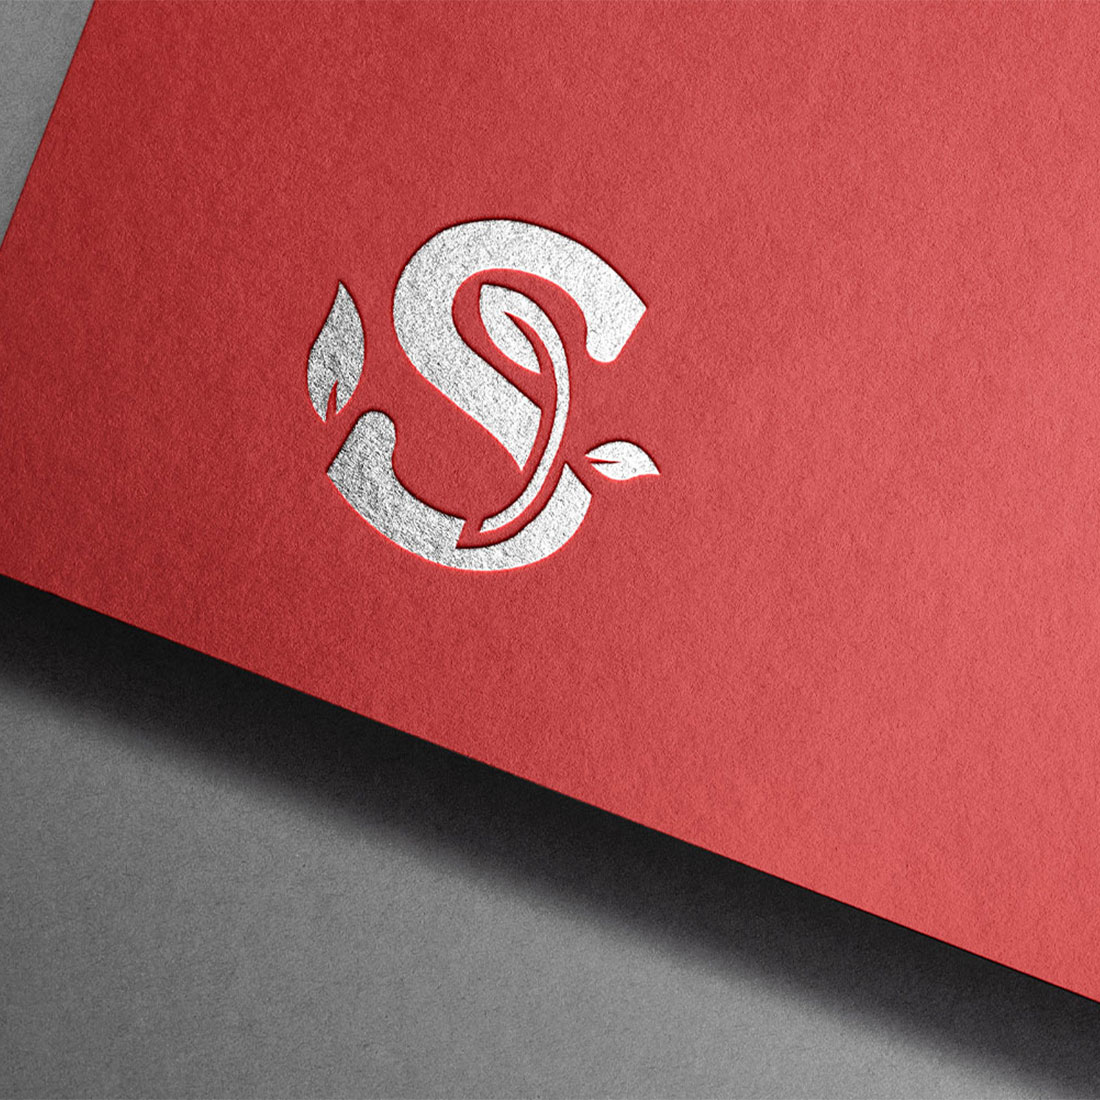 S Steps Logo Template preview image.